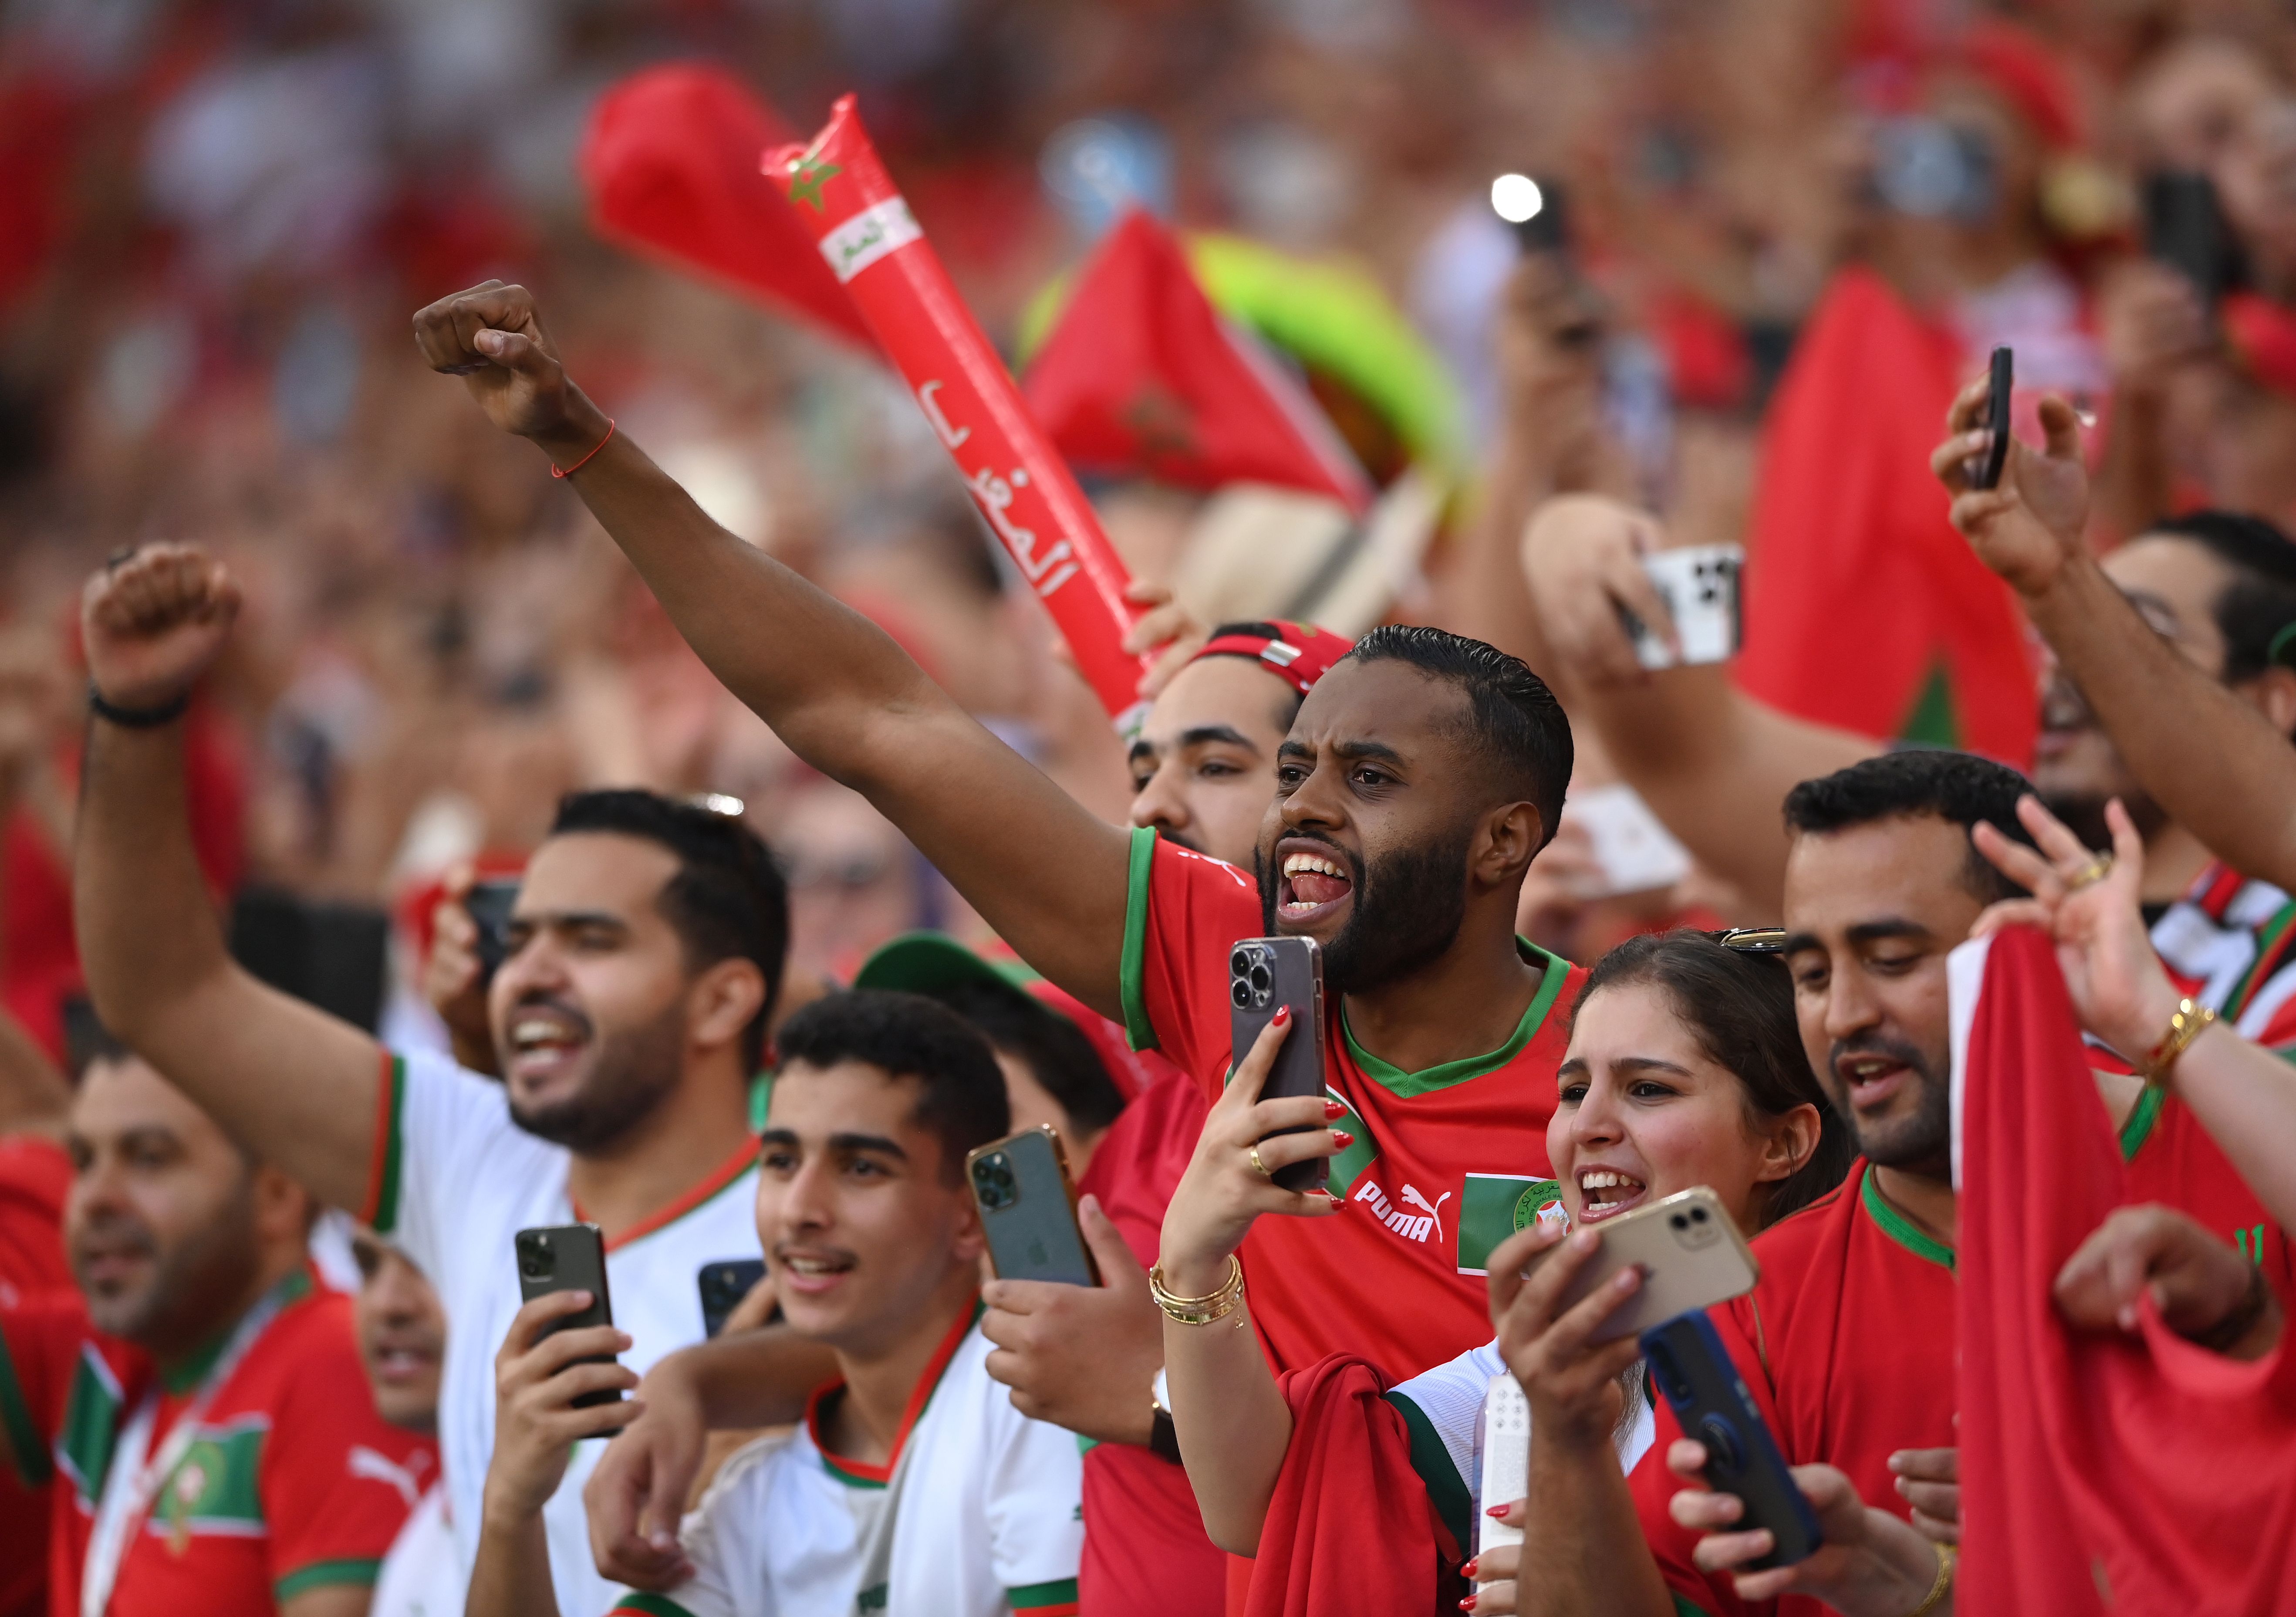 Morocco fans follow Japan's lead by cleaning stadium after World Cup upset against Belgium